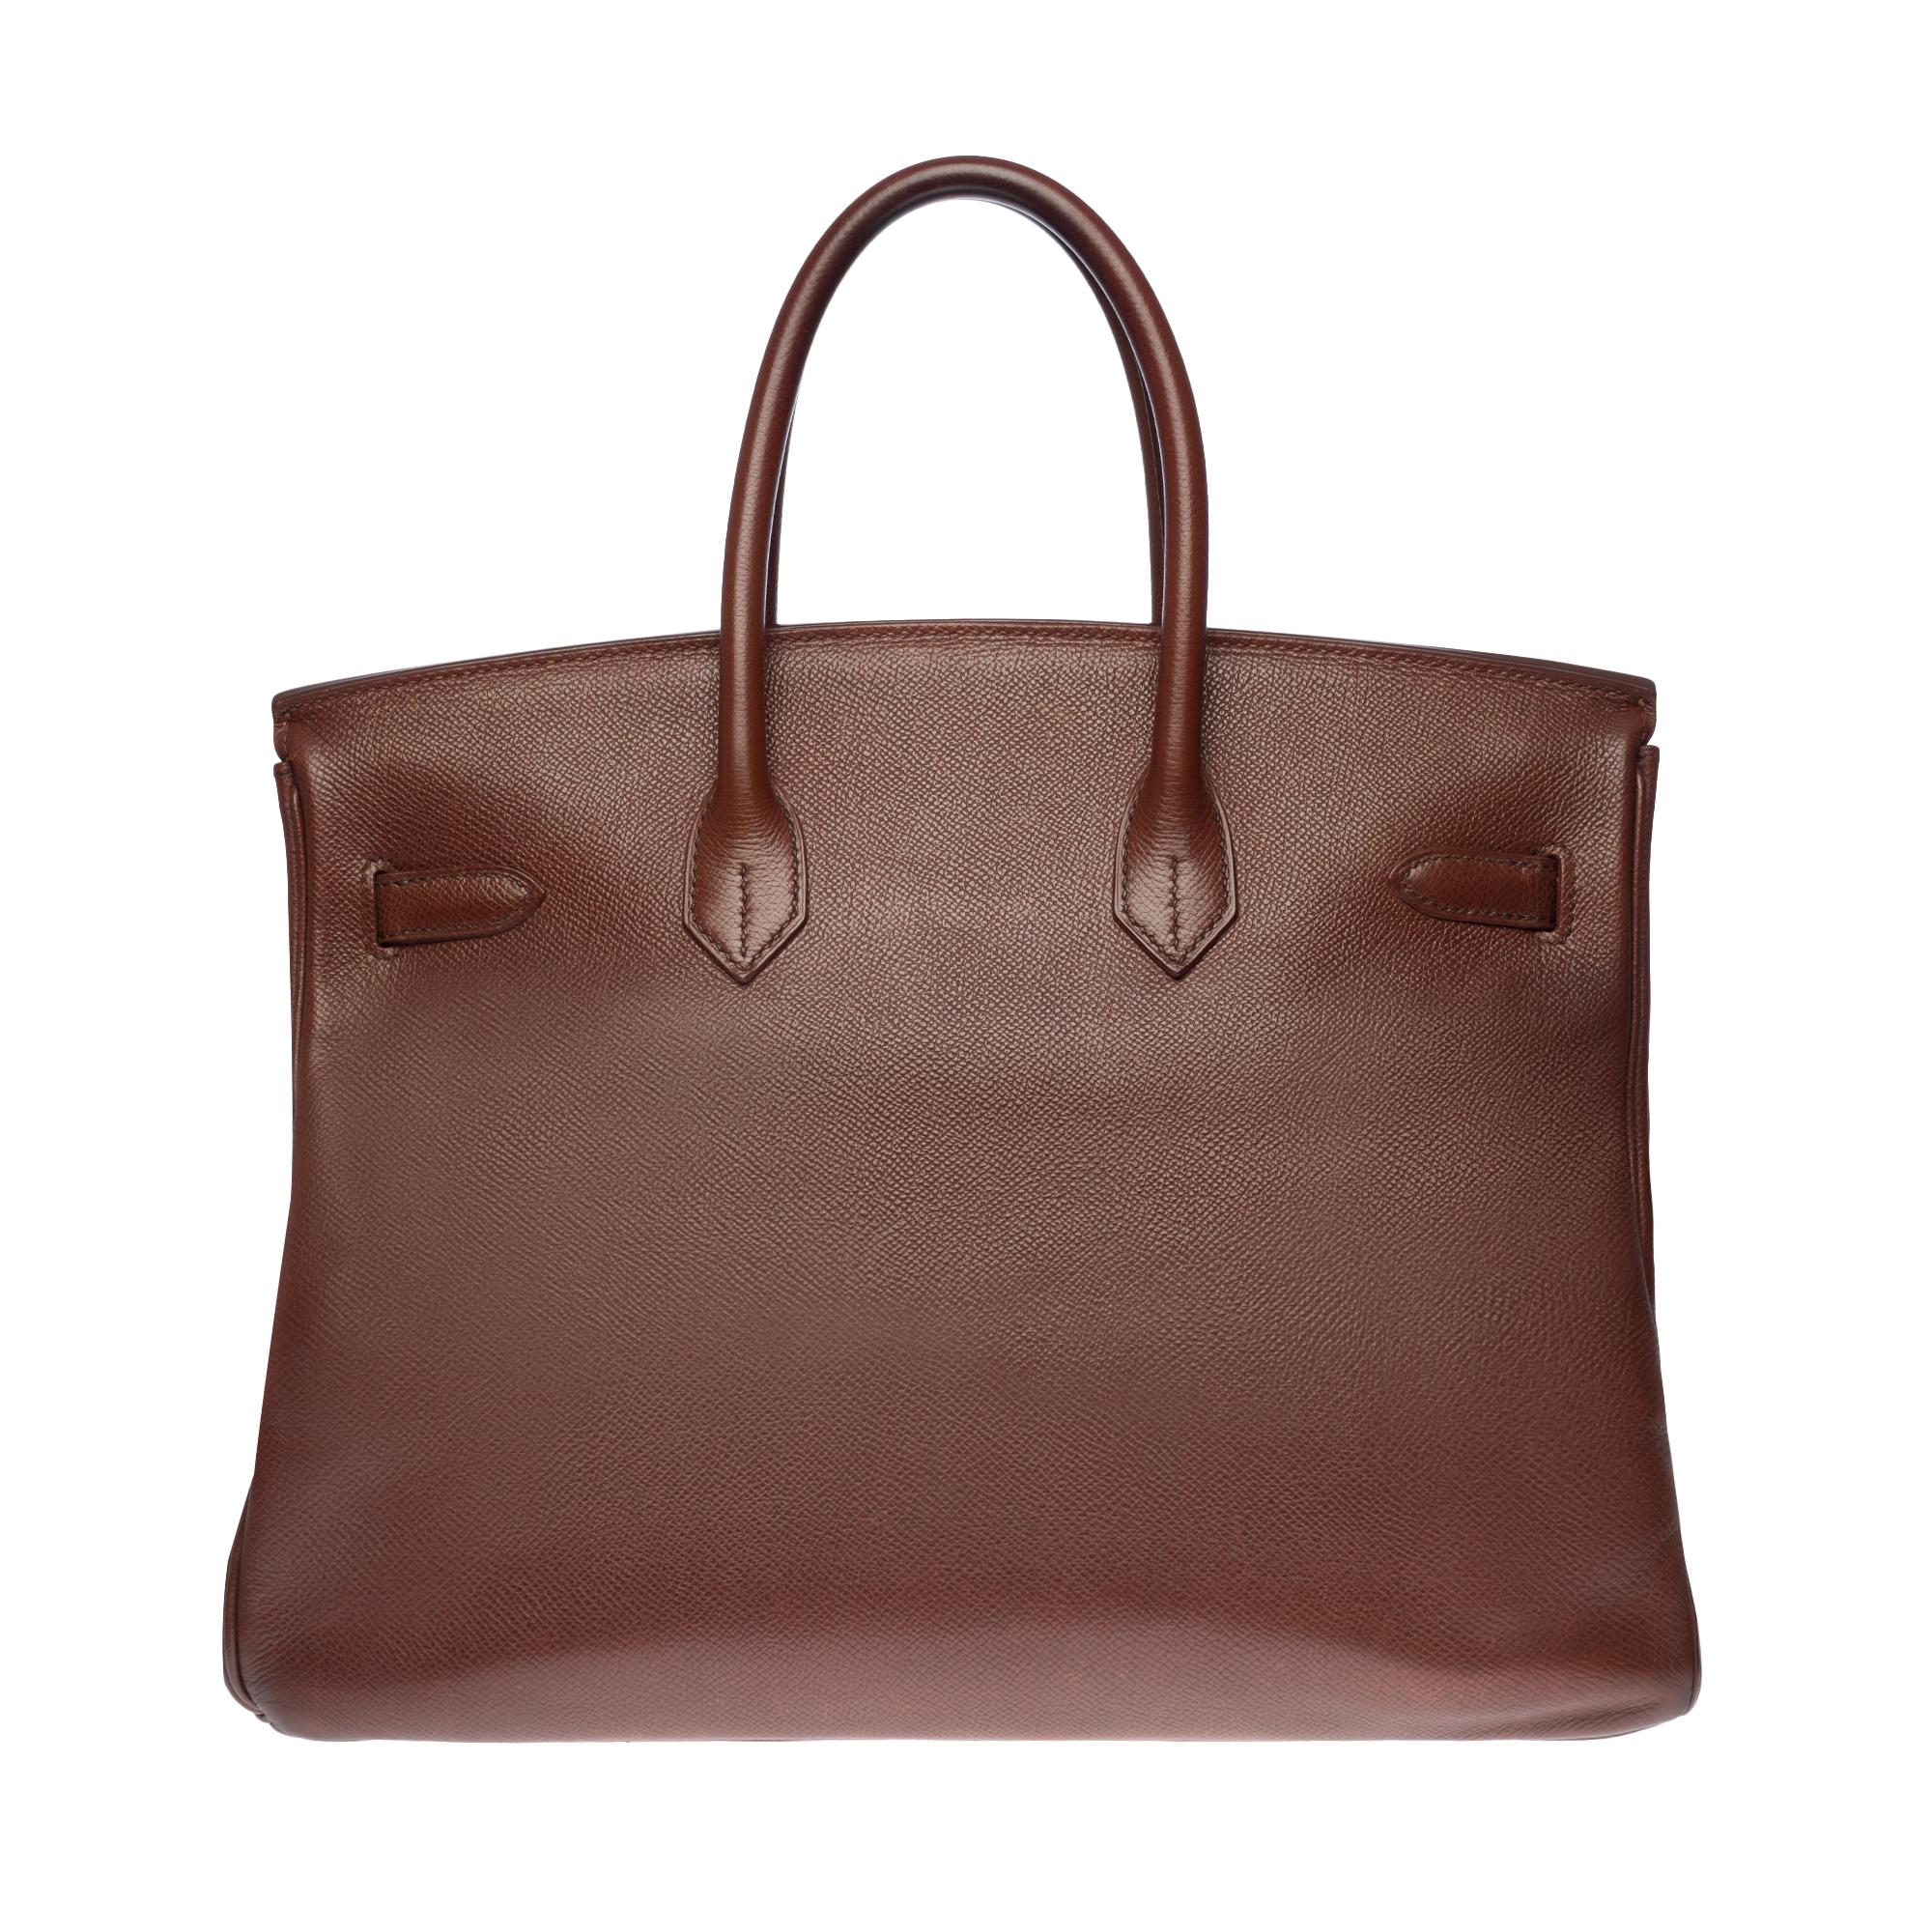 Beautiful Hermes Birkin 35 cm handbag in brown Courchevel leather, gold-plated metal hardware, double brown leather handle allowing a handheld.

Closure by flap.
Lining in brown leather, a zipped pocket, a patch pocket.
Signature: 